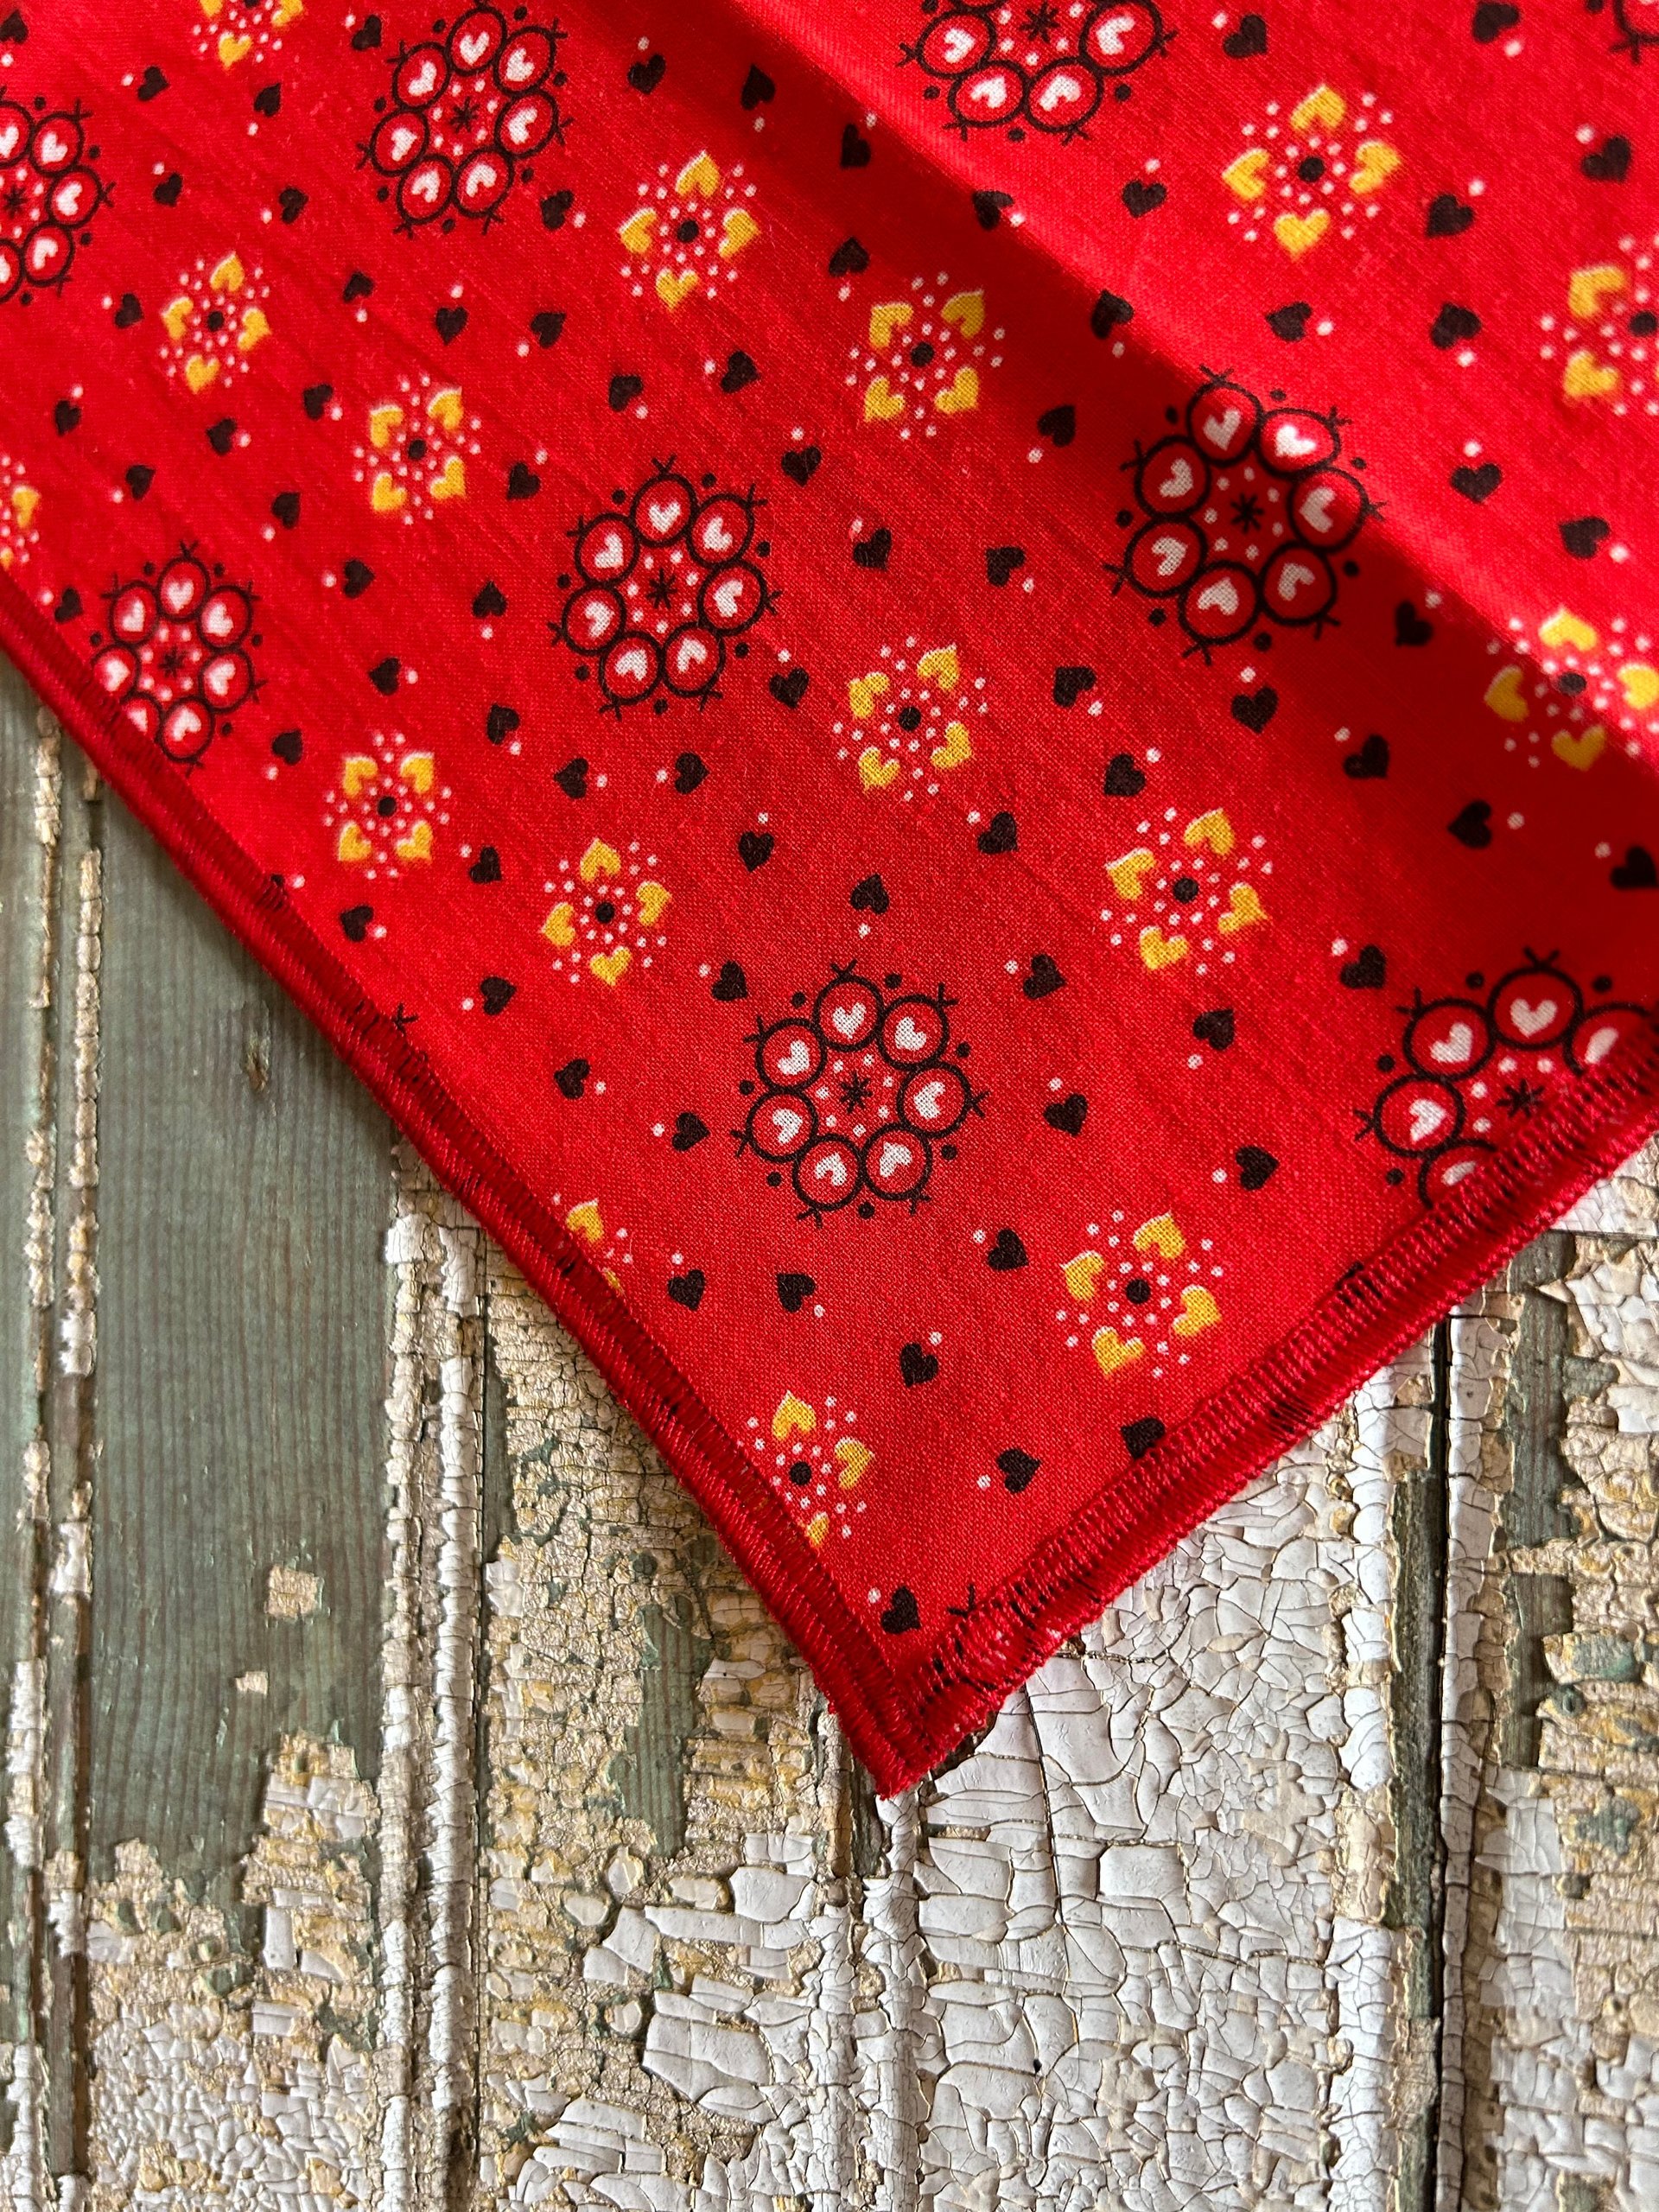 Handmade Fabric Luncheon Napkins - Western Style, Bold Red, Calico Print - Set of 4